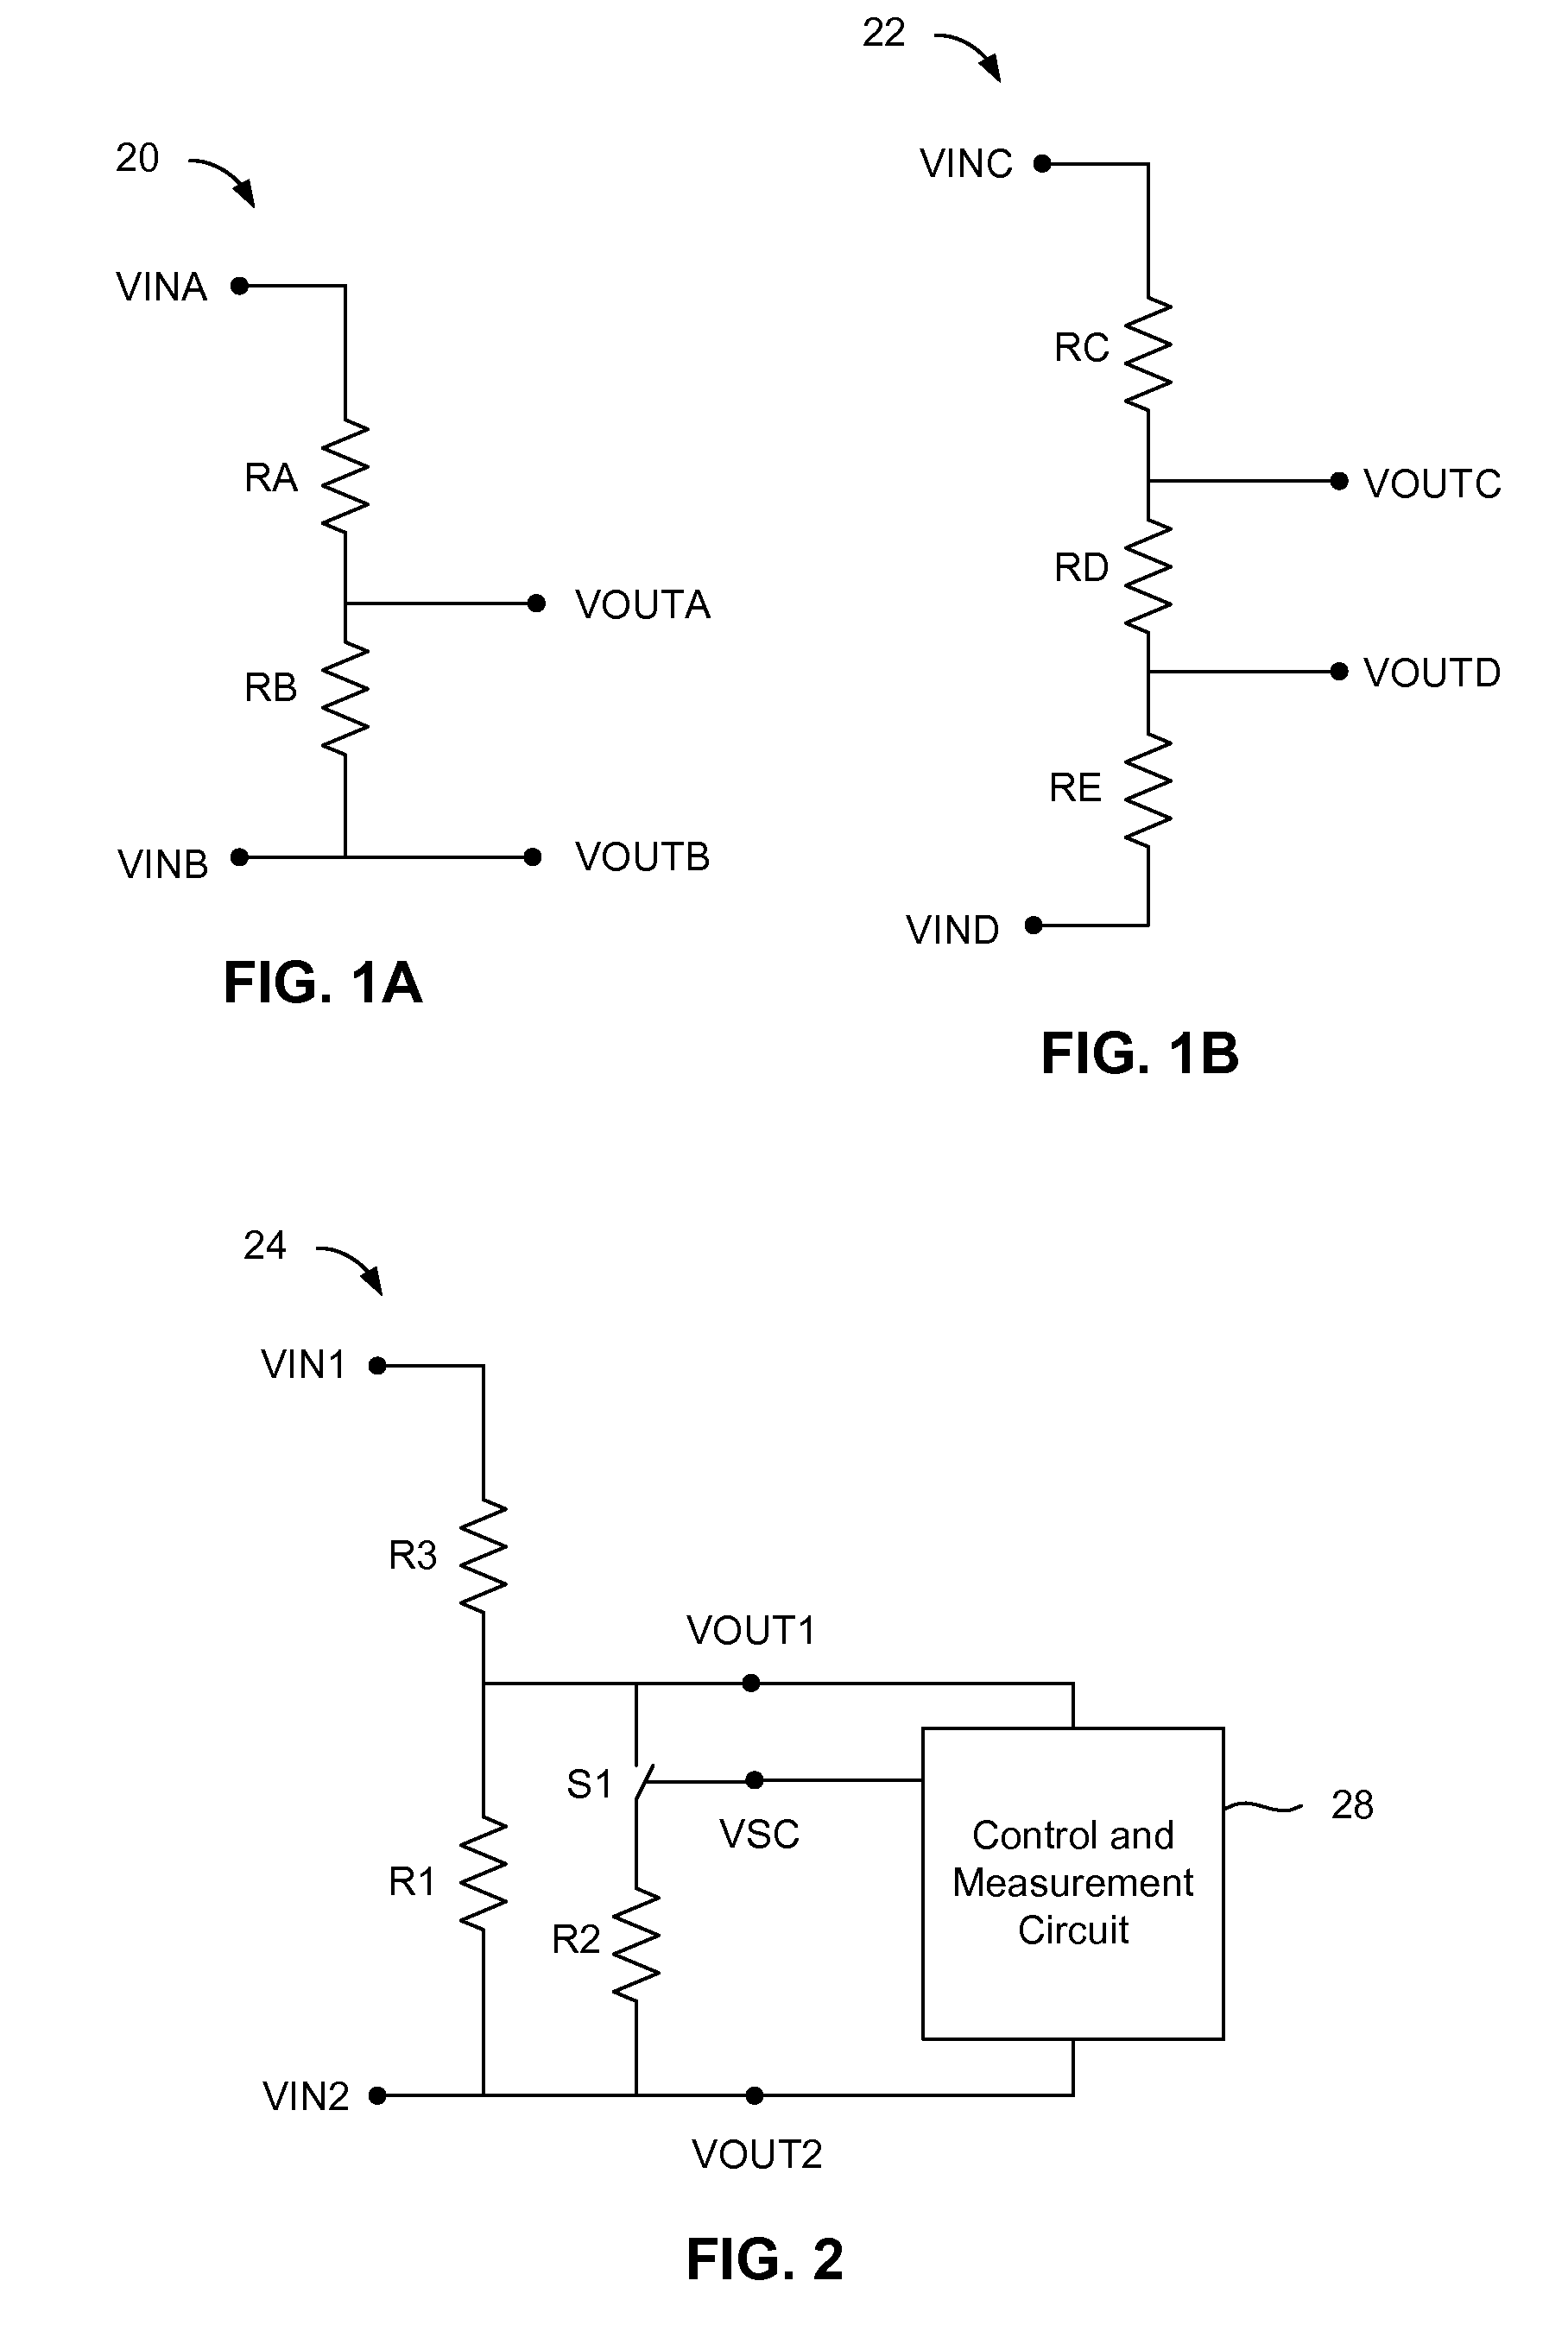 Voltage-measuring circuit and method